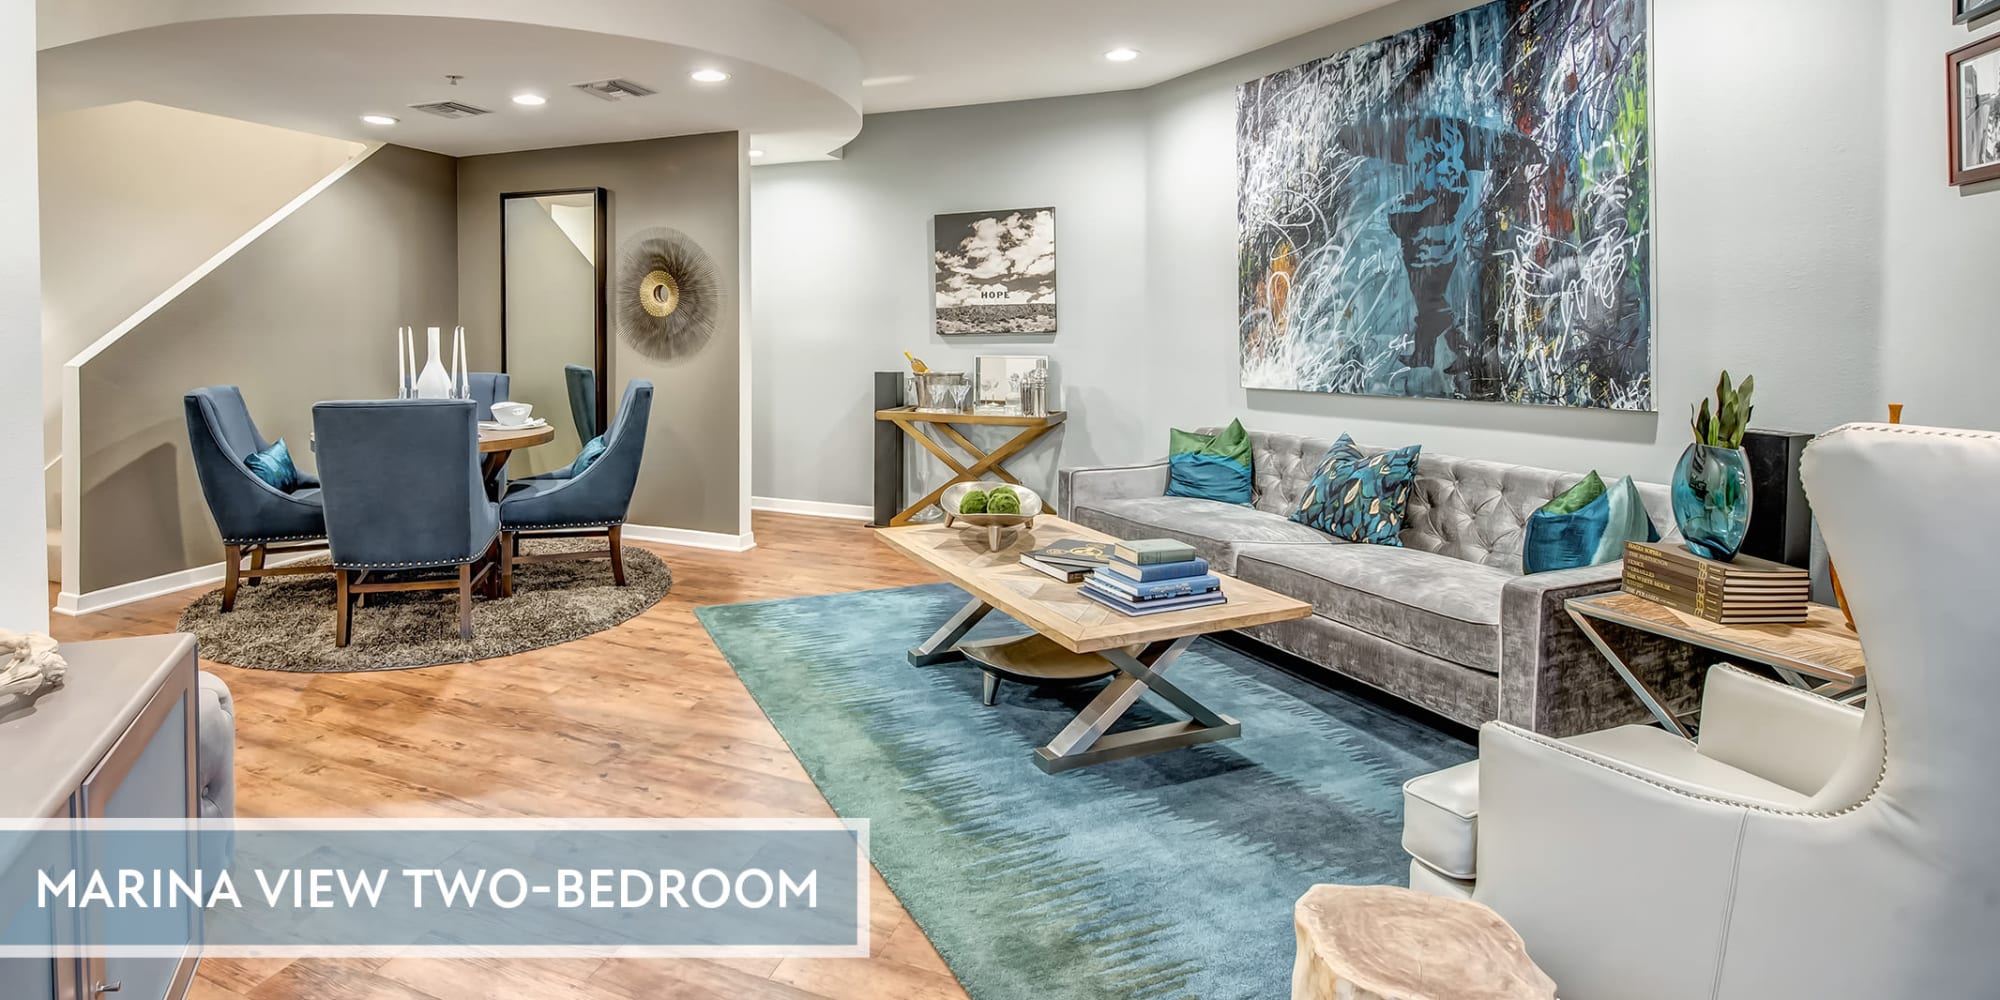 Model luxury townhome with hardwood flooring and exquisite furnishings at Esprit Marina del Rey in Marina del Rey, California